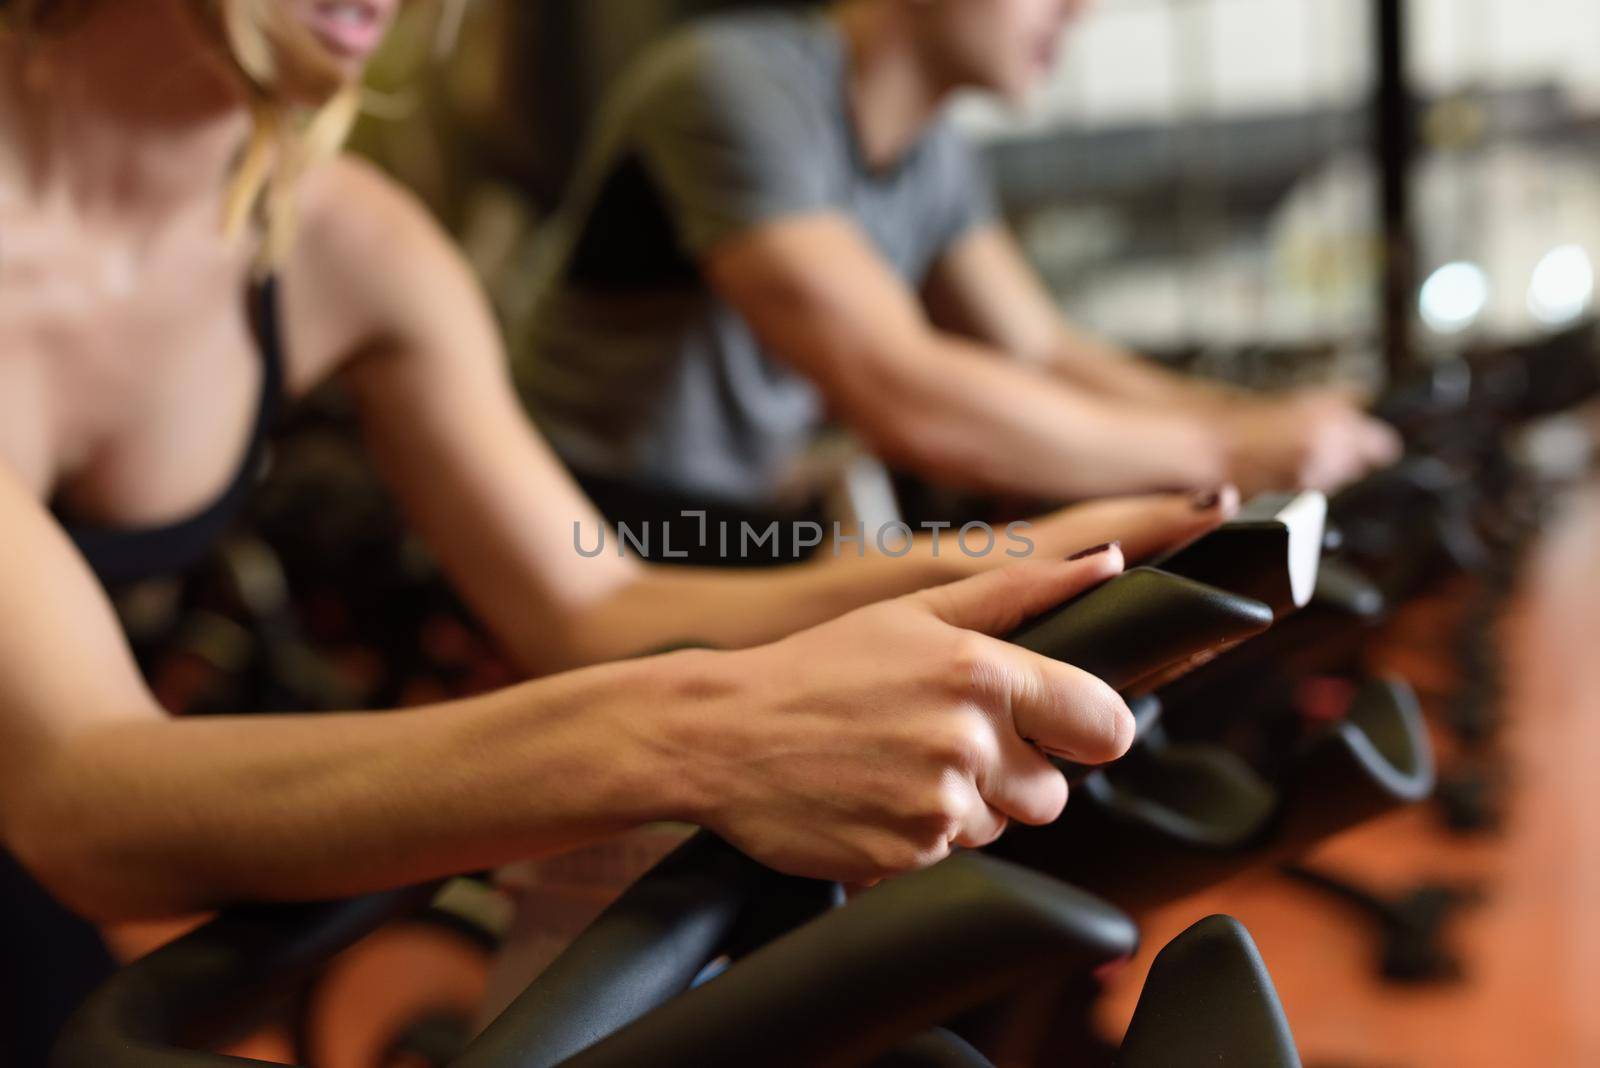 Two people biking in the gym, exercising legs doing cardio workout cycling bikes. Couple in a spinning class wearing sportswear.